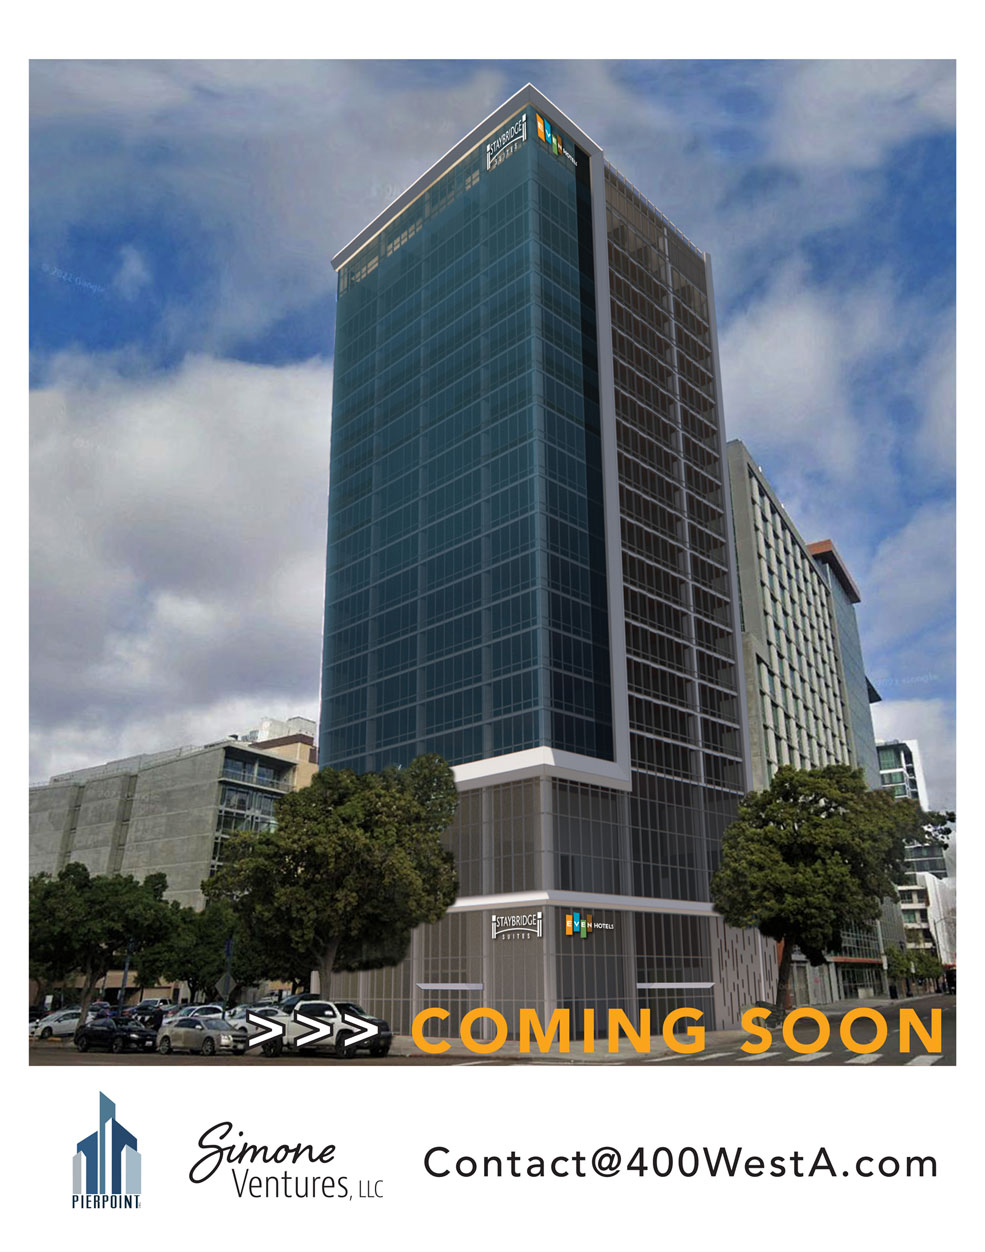 400 West A Coming Soon